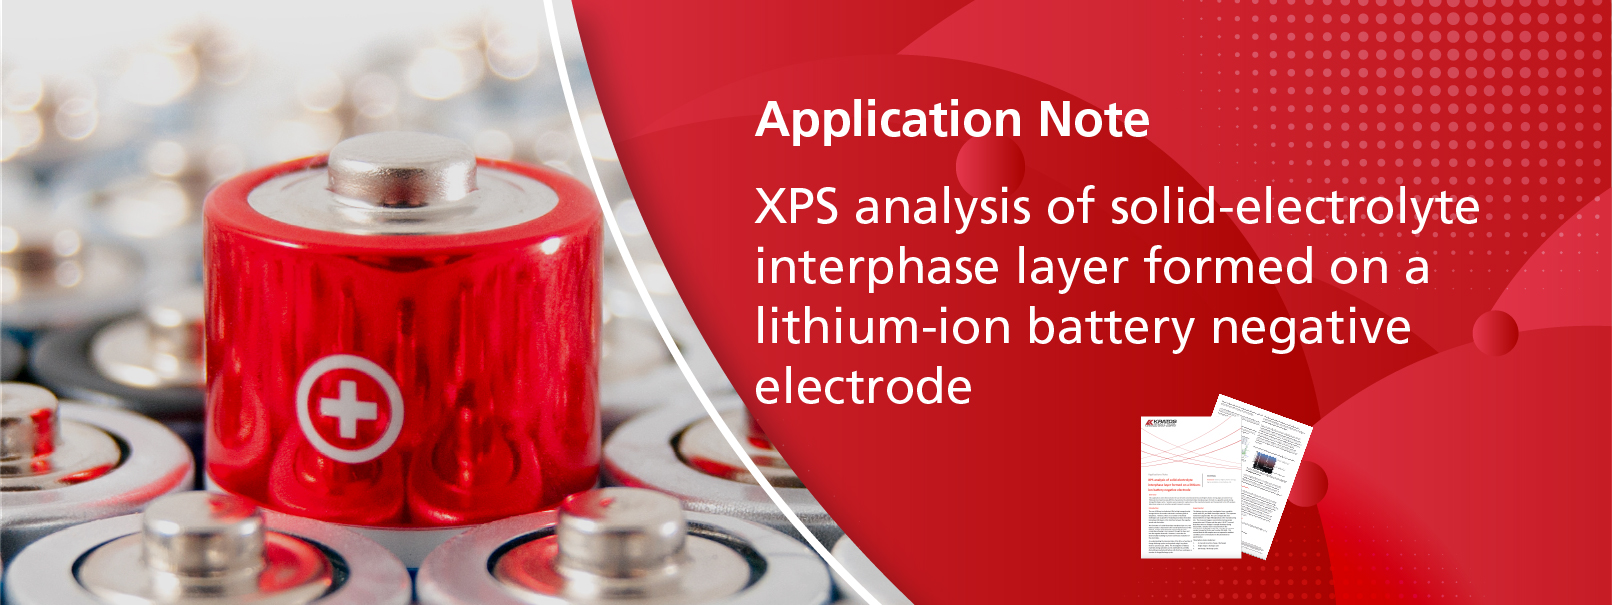 XPS Analysis of Solid-Electrolyte Interphase Layer formed on a Lithium-Ion Battery Negative Electrode